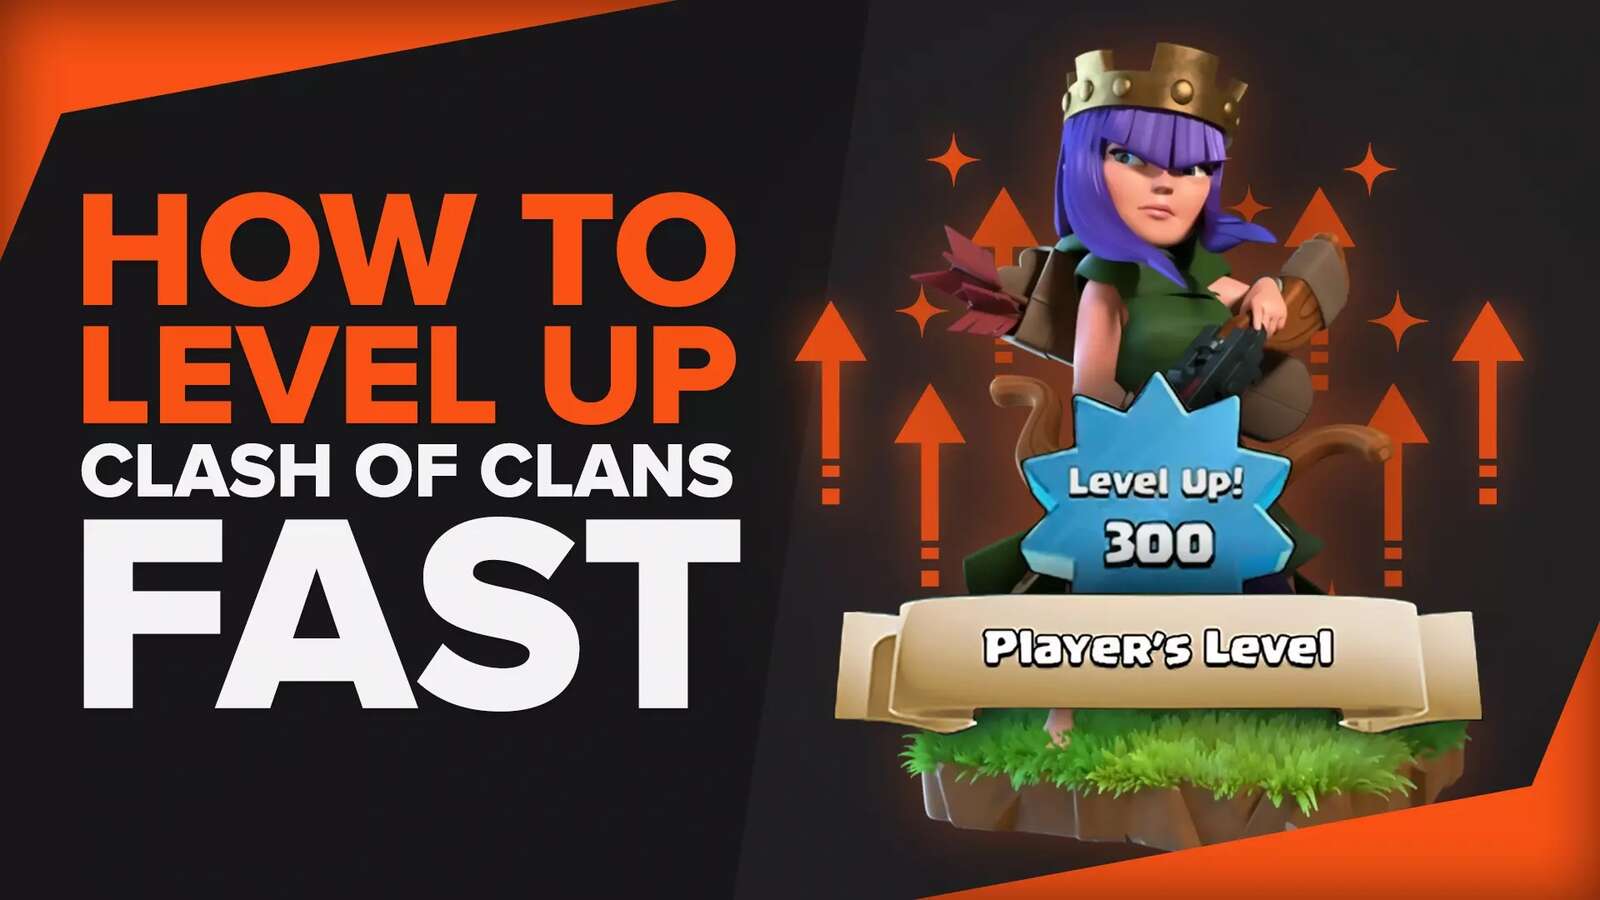 How To Level Up Clan In Clash Of Clans Fast? (All Methods)